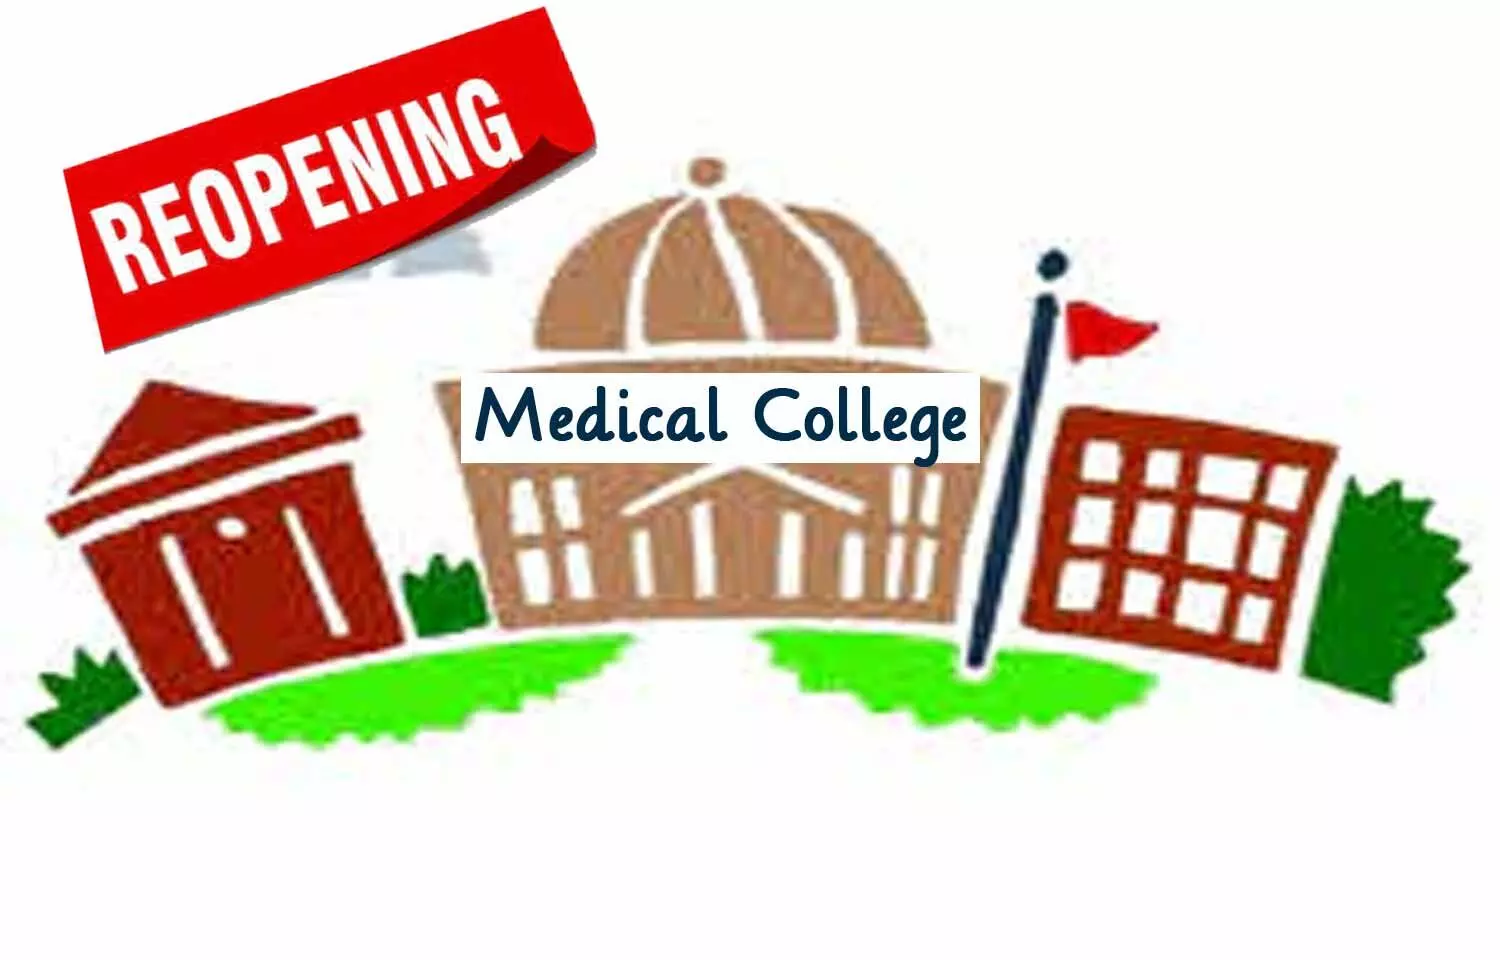 Delhi Govt-run medical colleges to resume physical classes in phased manner